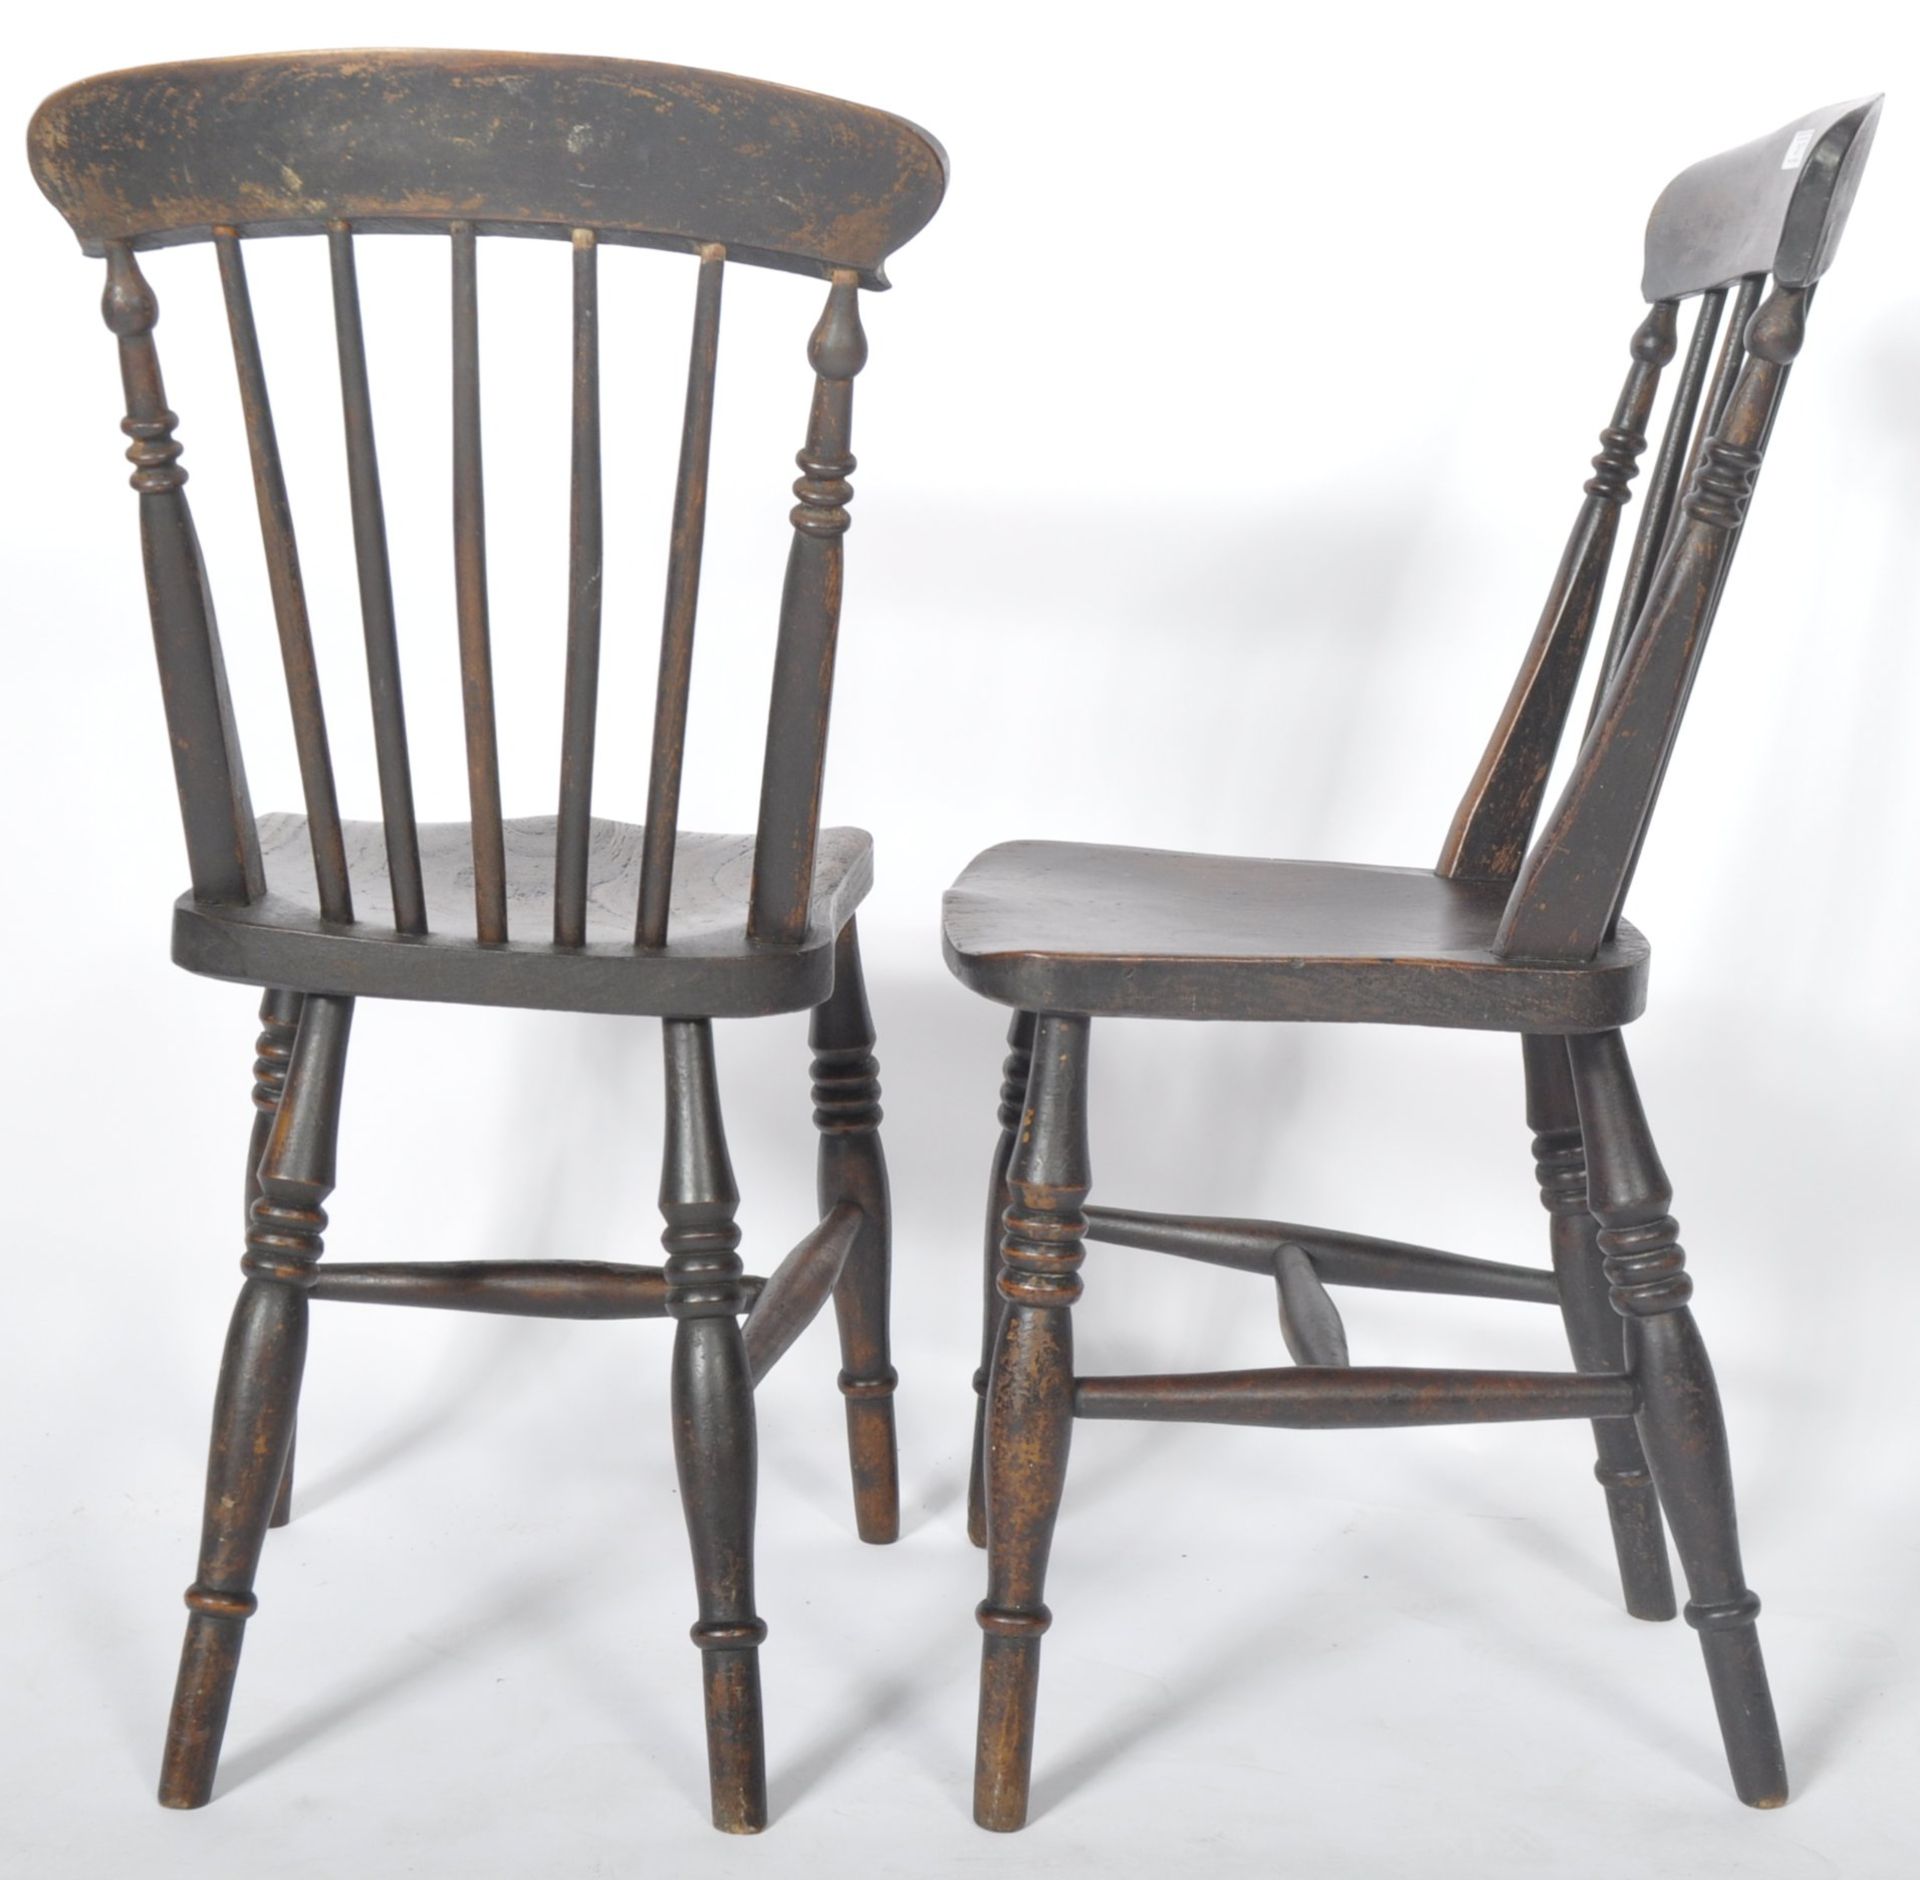 SET OF FOUR 19TH CENTURY BEECH & ELM FARMHOUSE DINING CHAIRS - Image 7 of 8